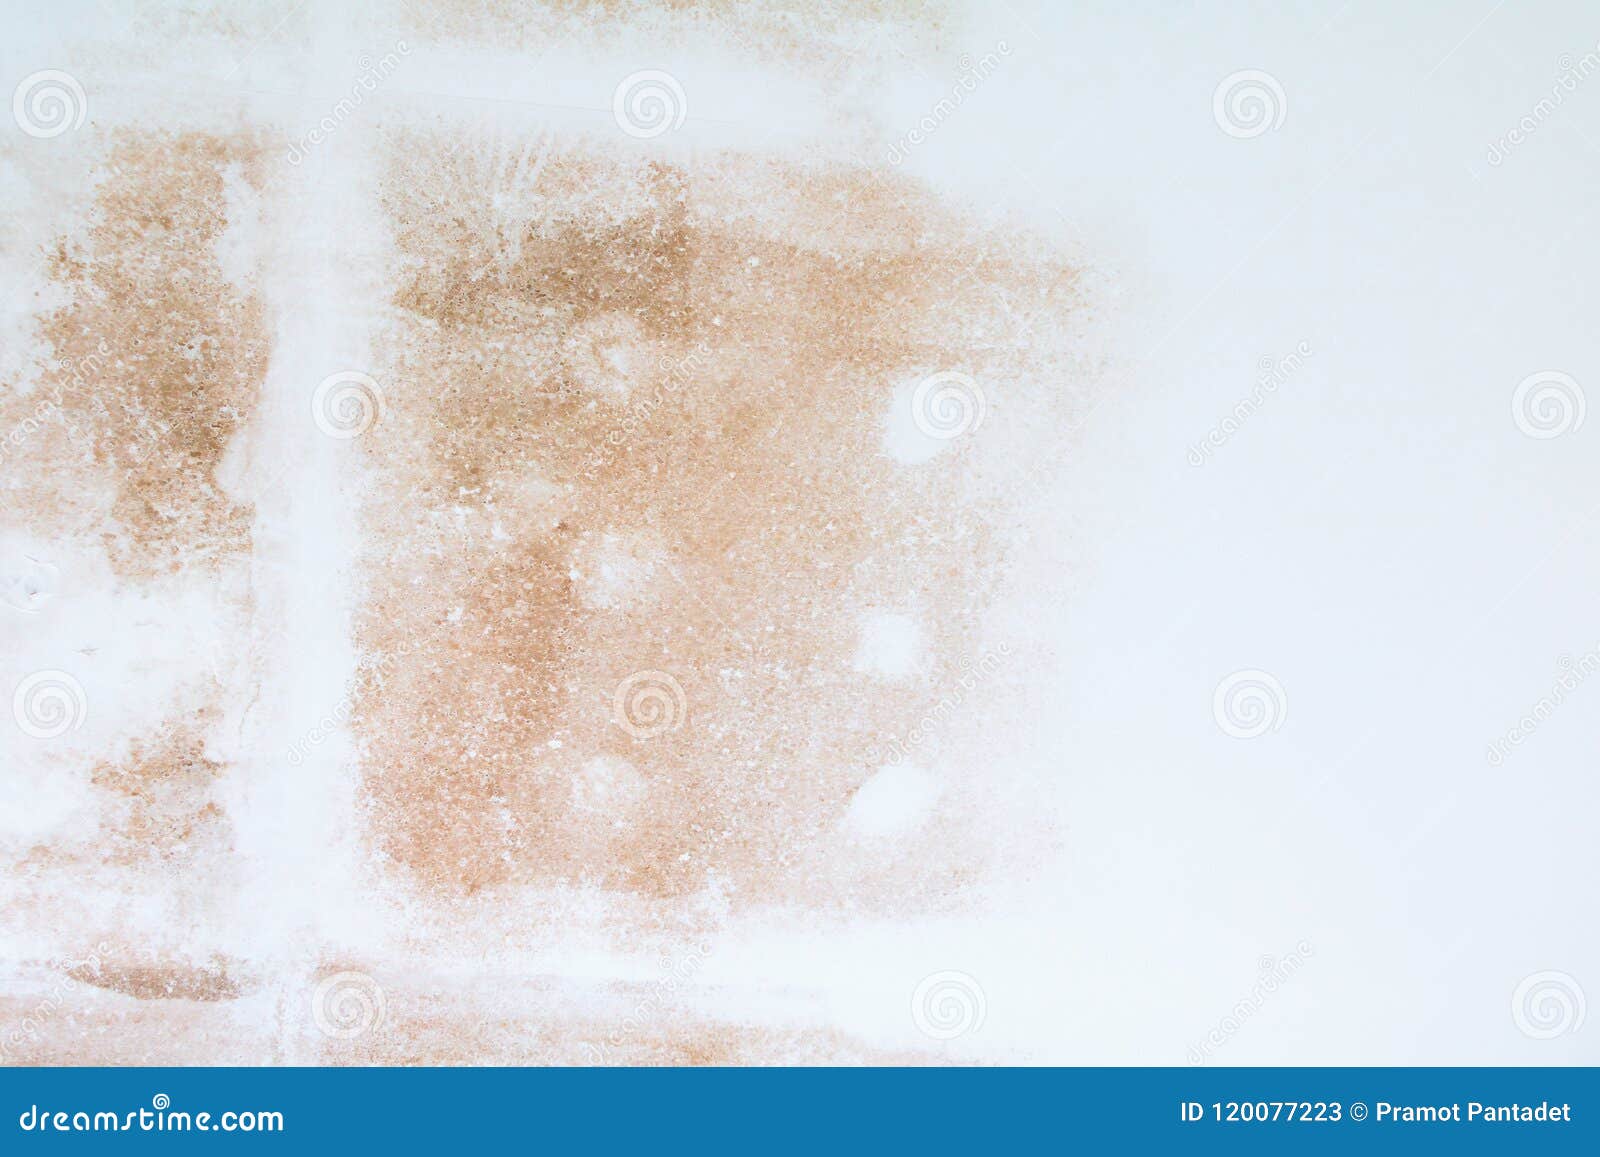 Gypsum Ceiling Inside Damaged By Water Leaking Stock Image